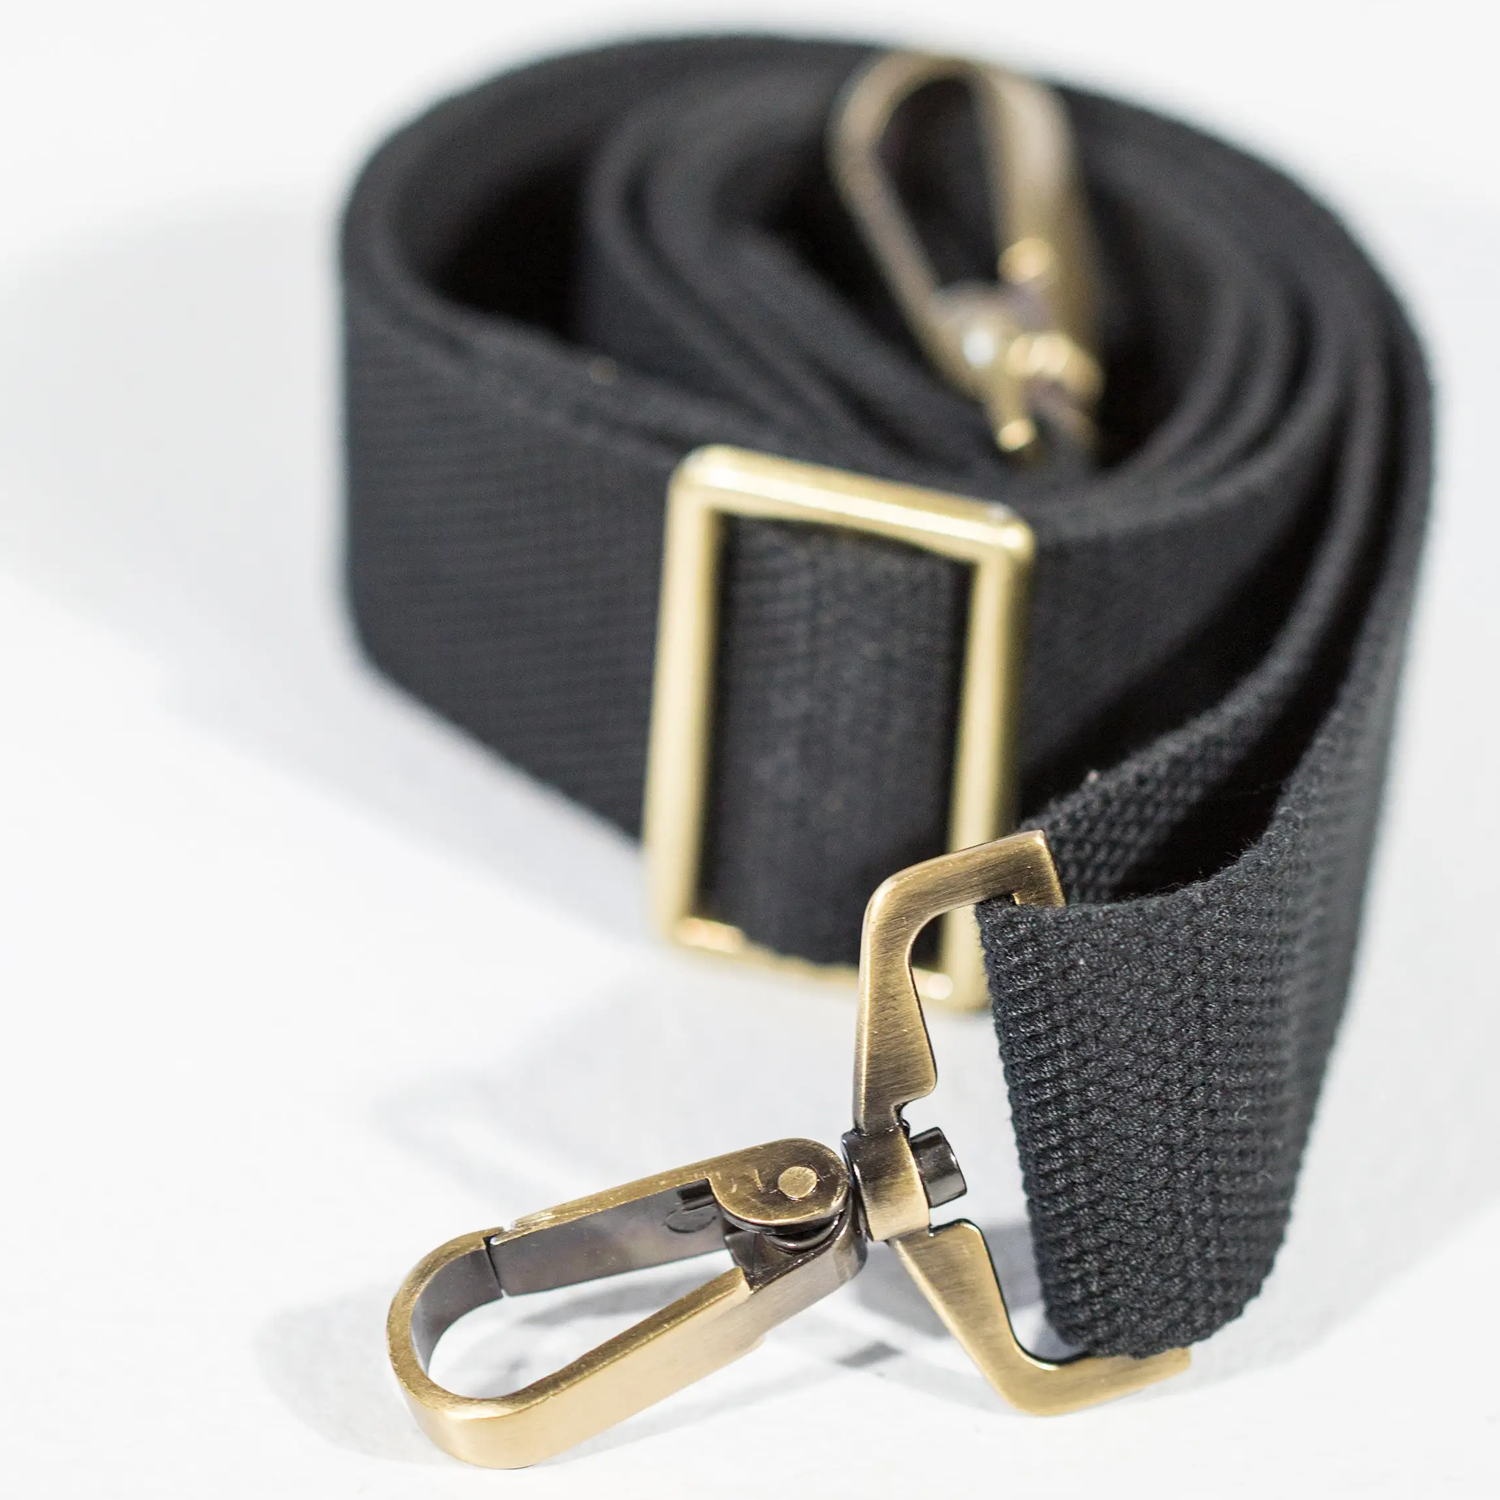 Pet Carrier - Midnight Mia Dog Carrier Strap by BK Atelier